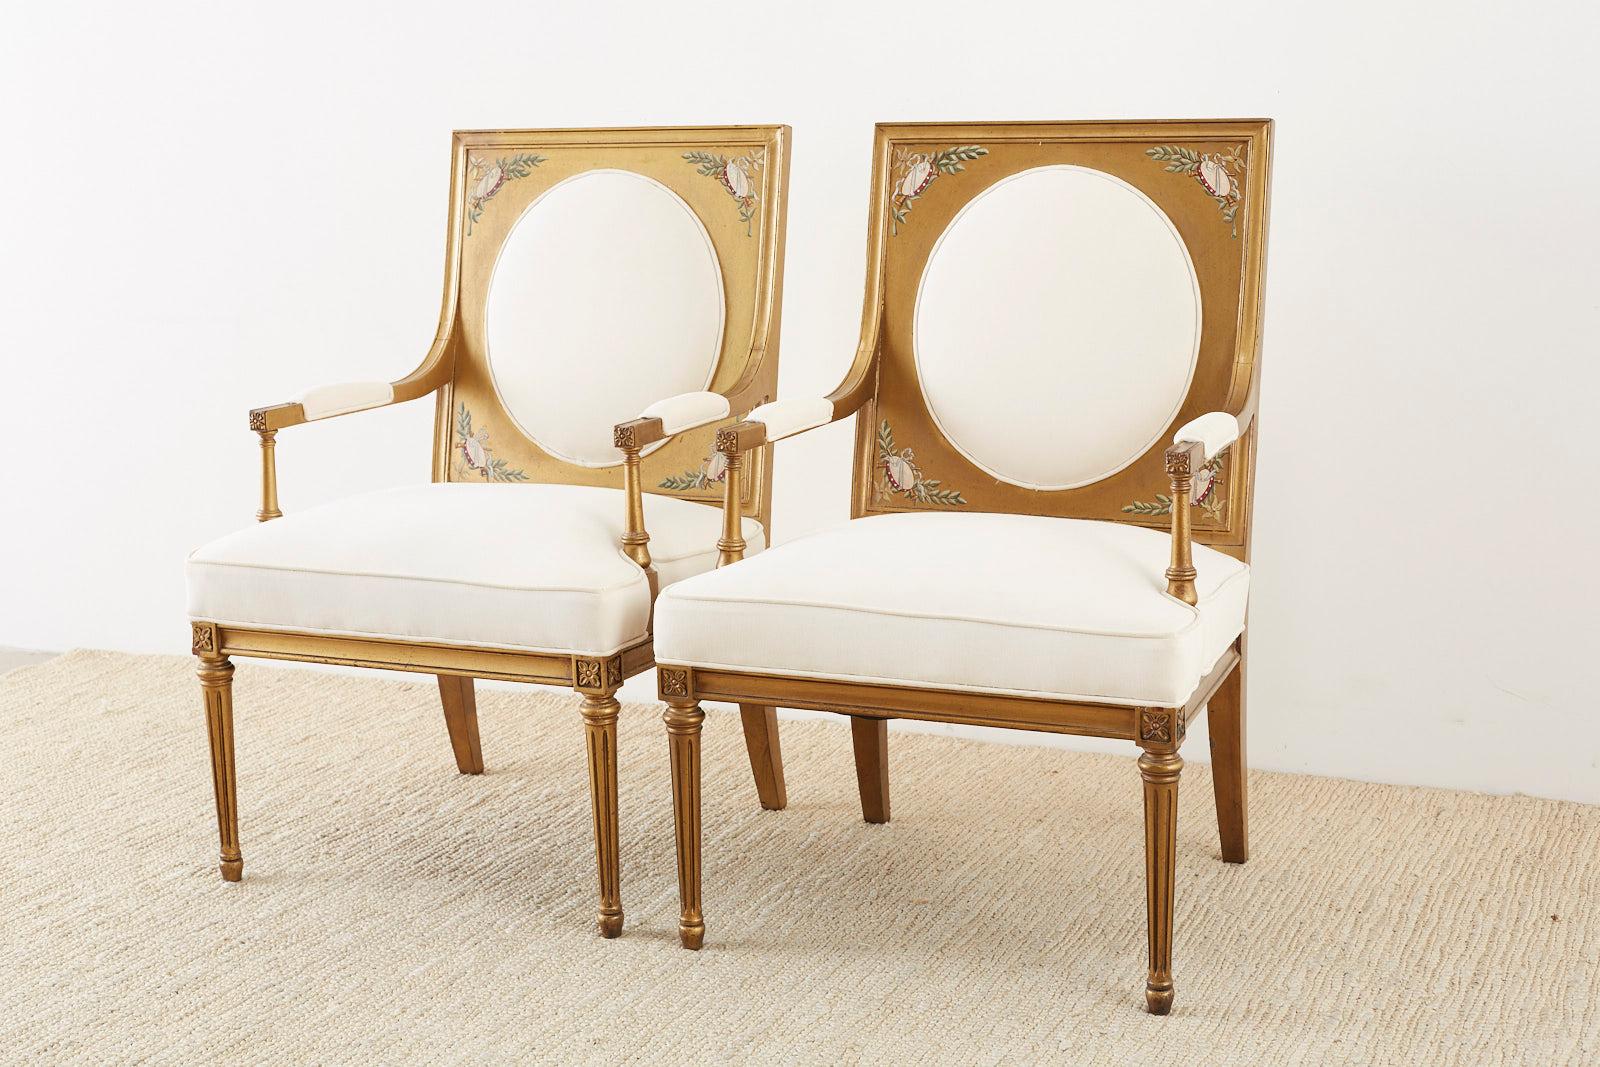 Hand-Crafted Pair of Louis XVI Swedish Gustavian Style Gilt Armchairs